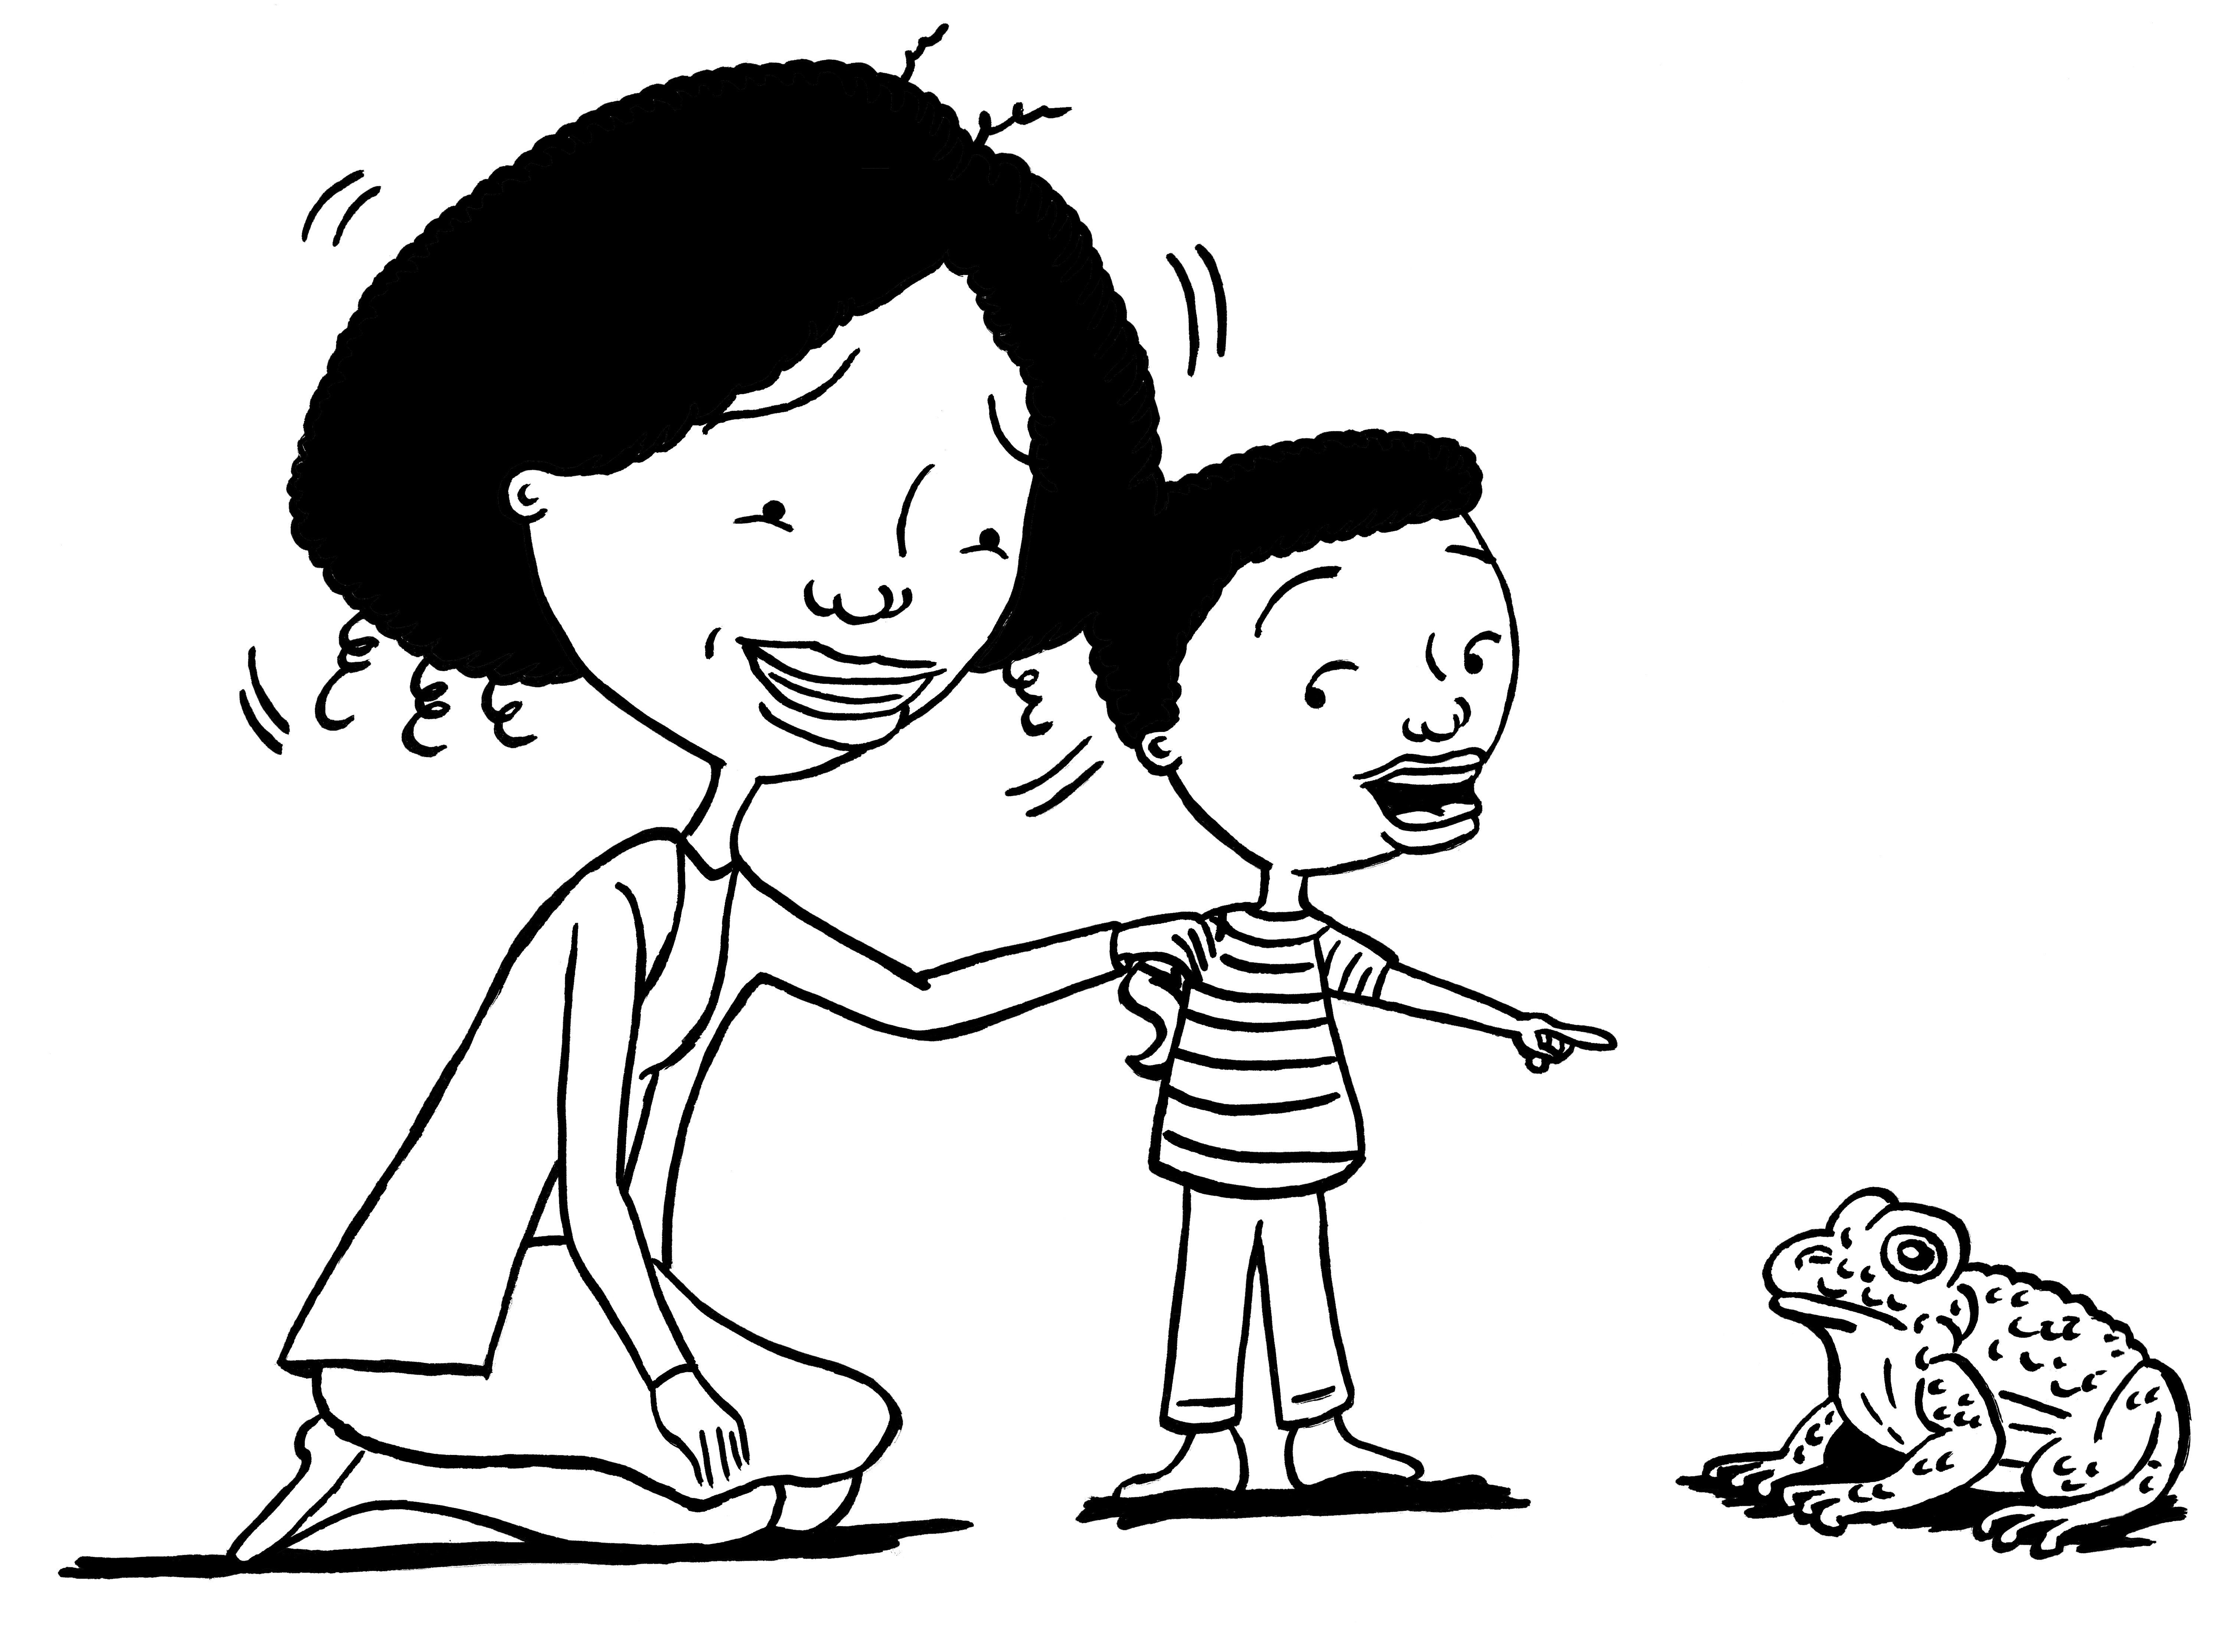 Illustration of a mother and her son smiling and pointing at a frog